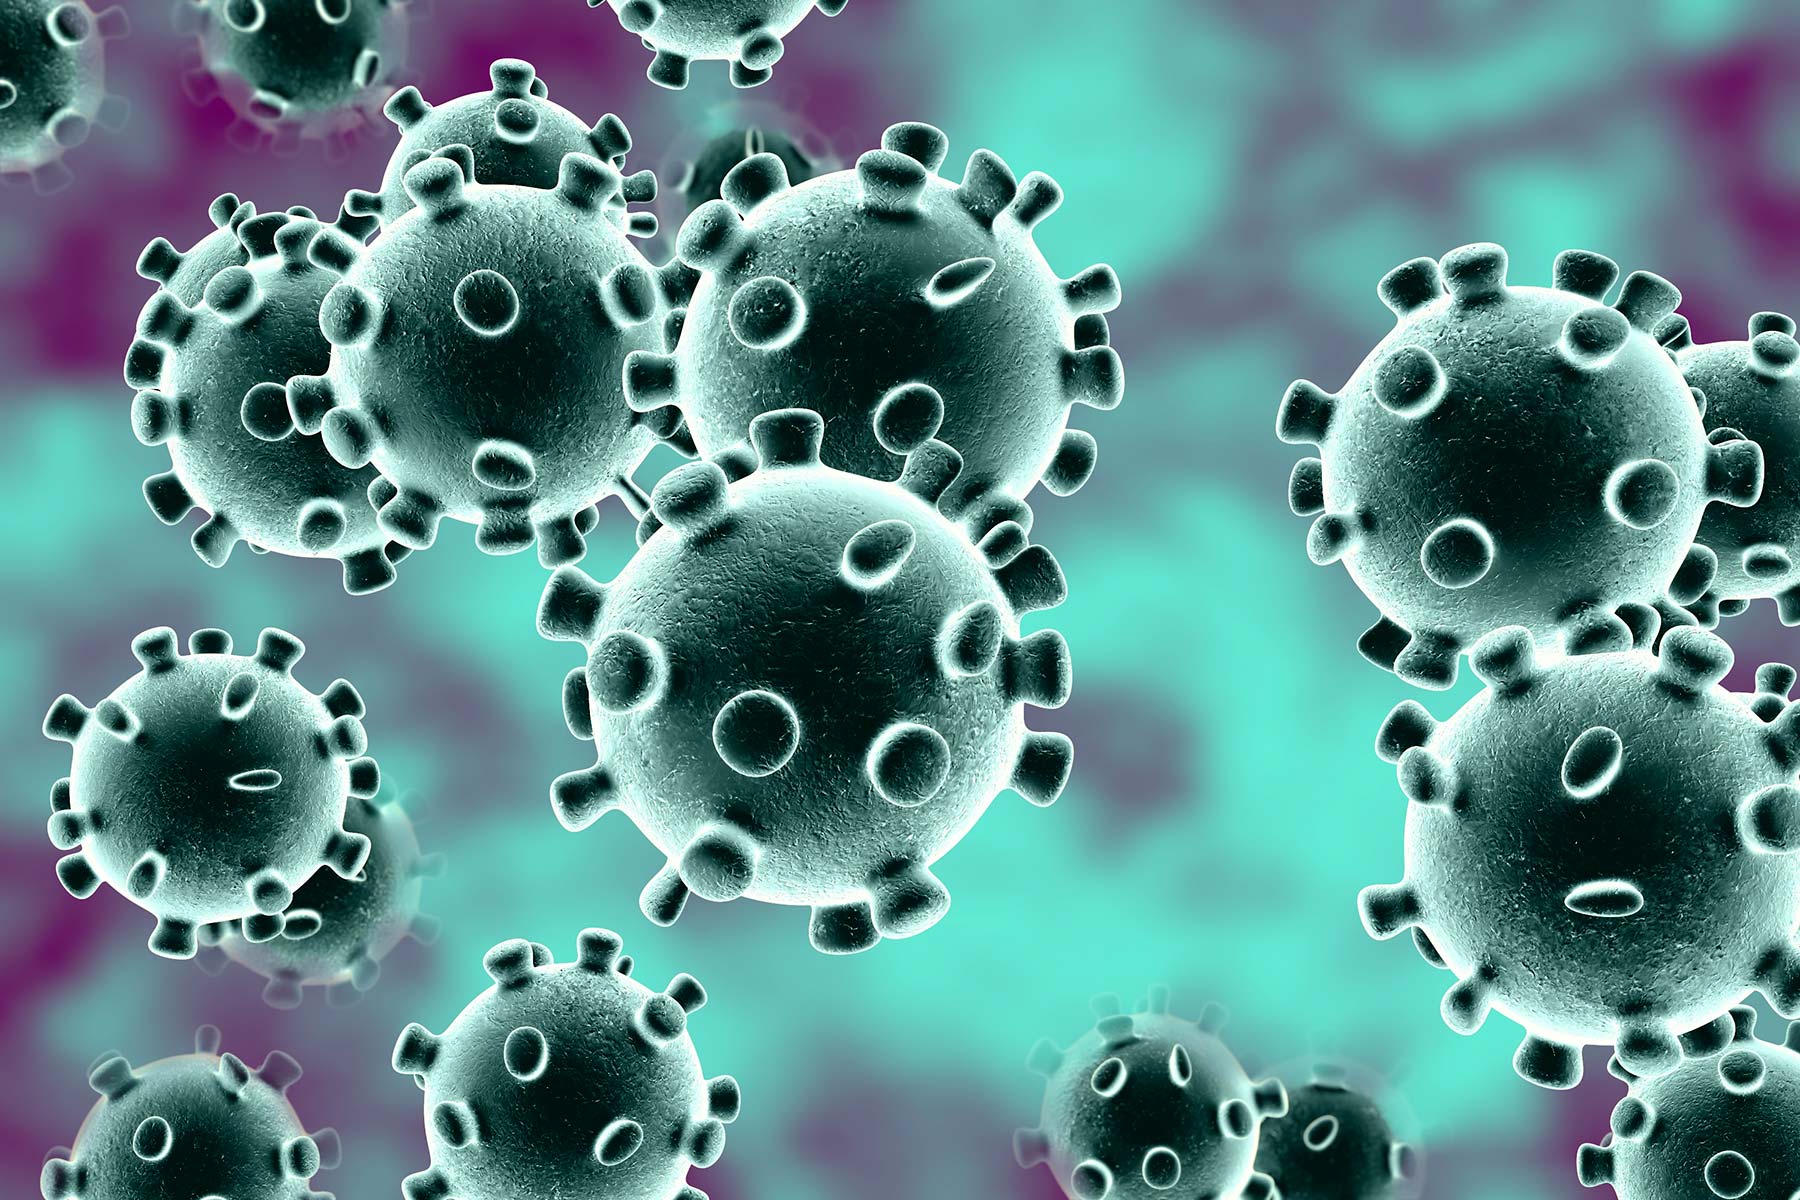 Coronavirus Speaks : “We must take actions to end our destructive ways.”